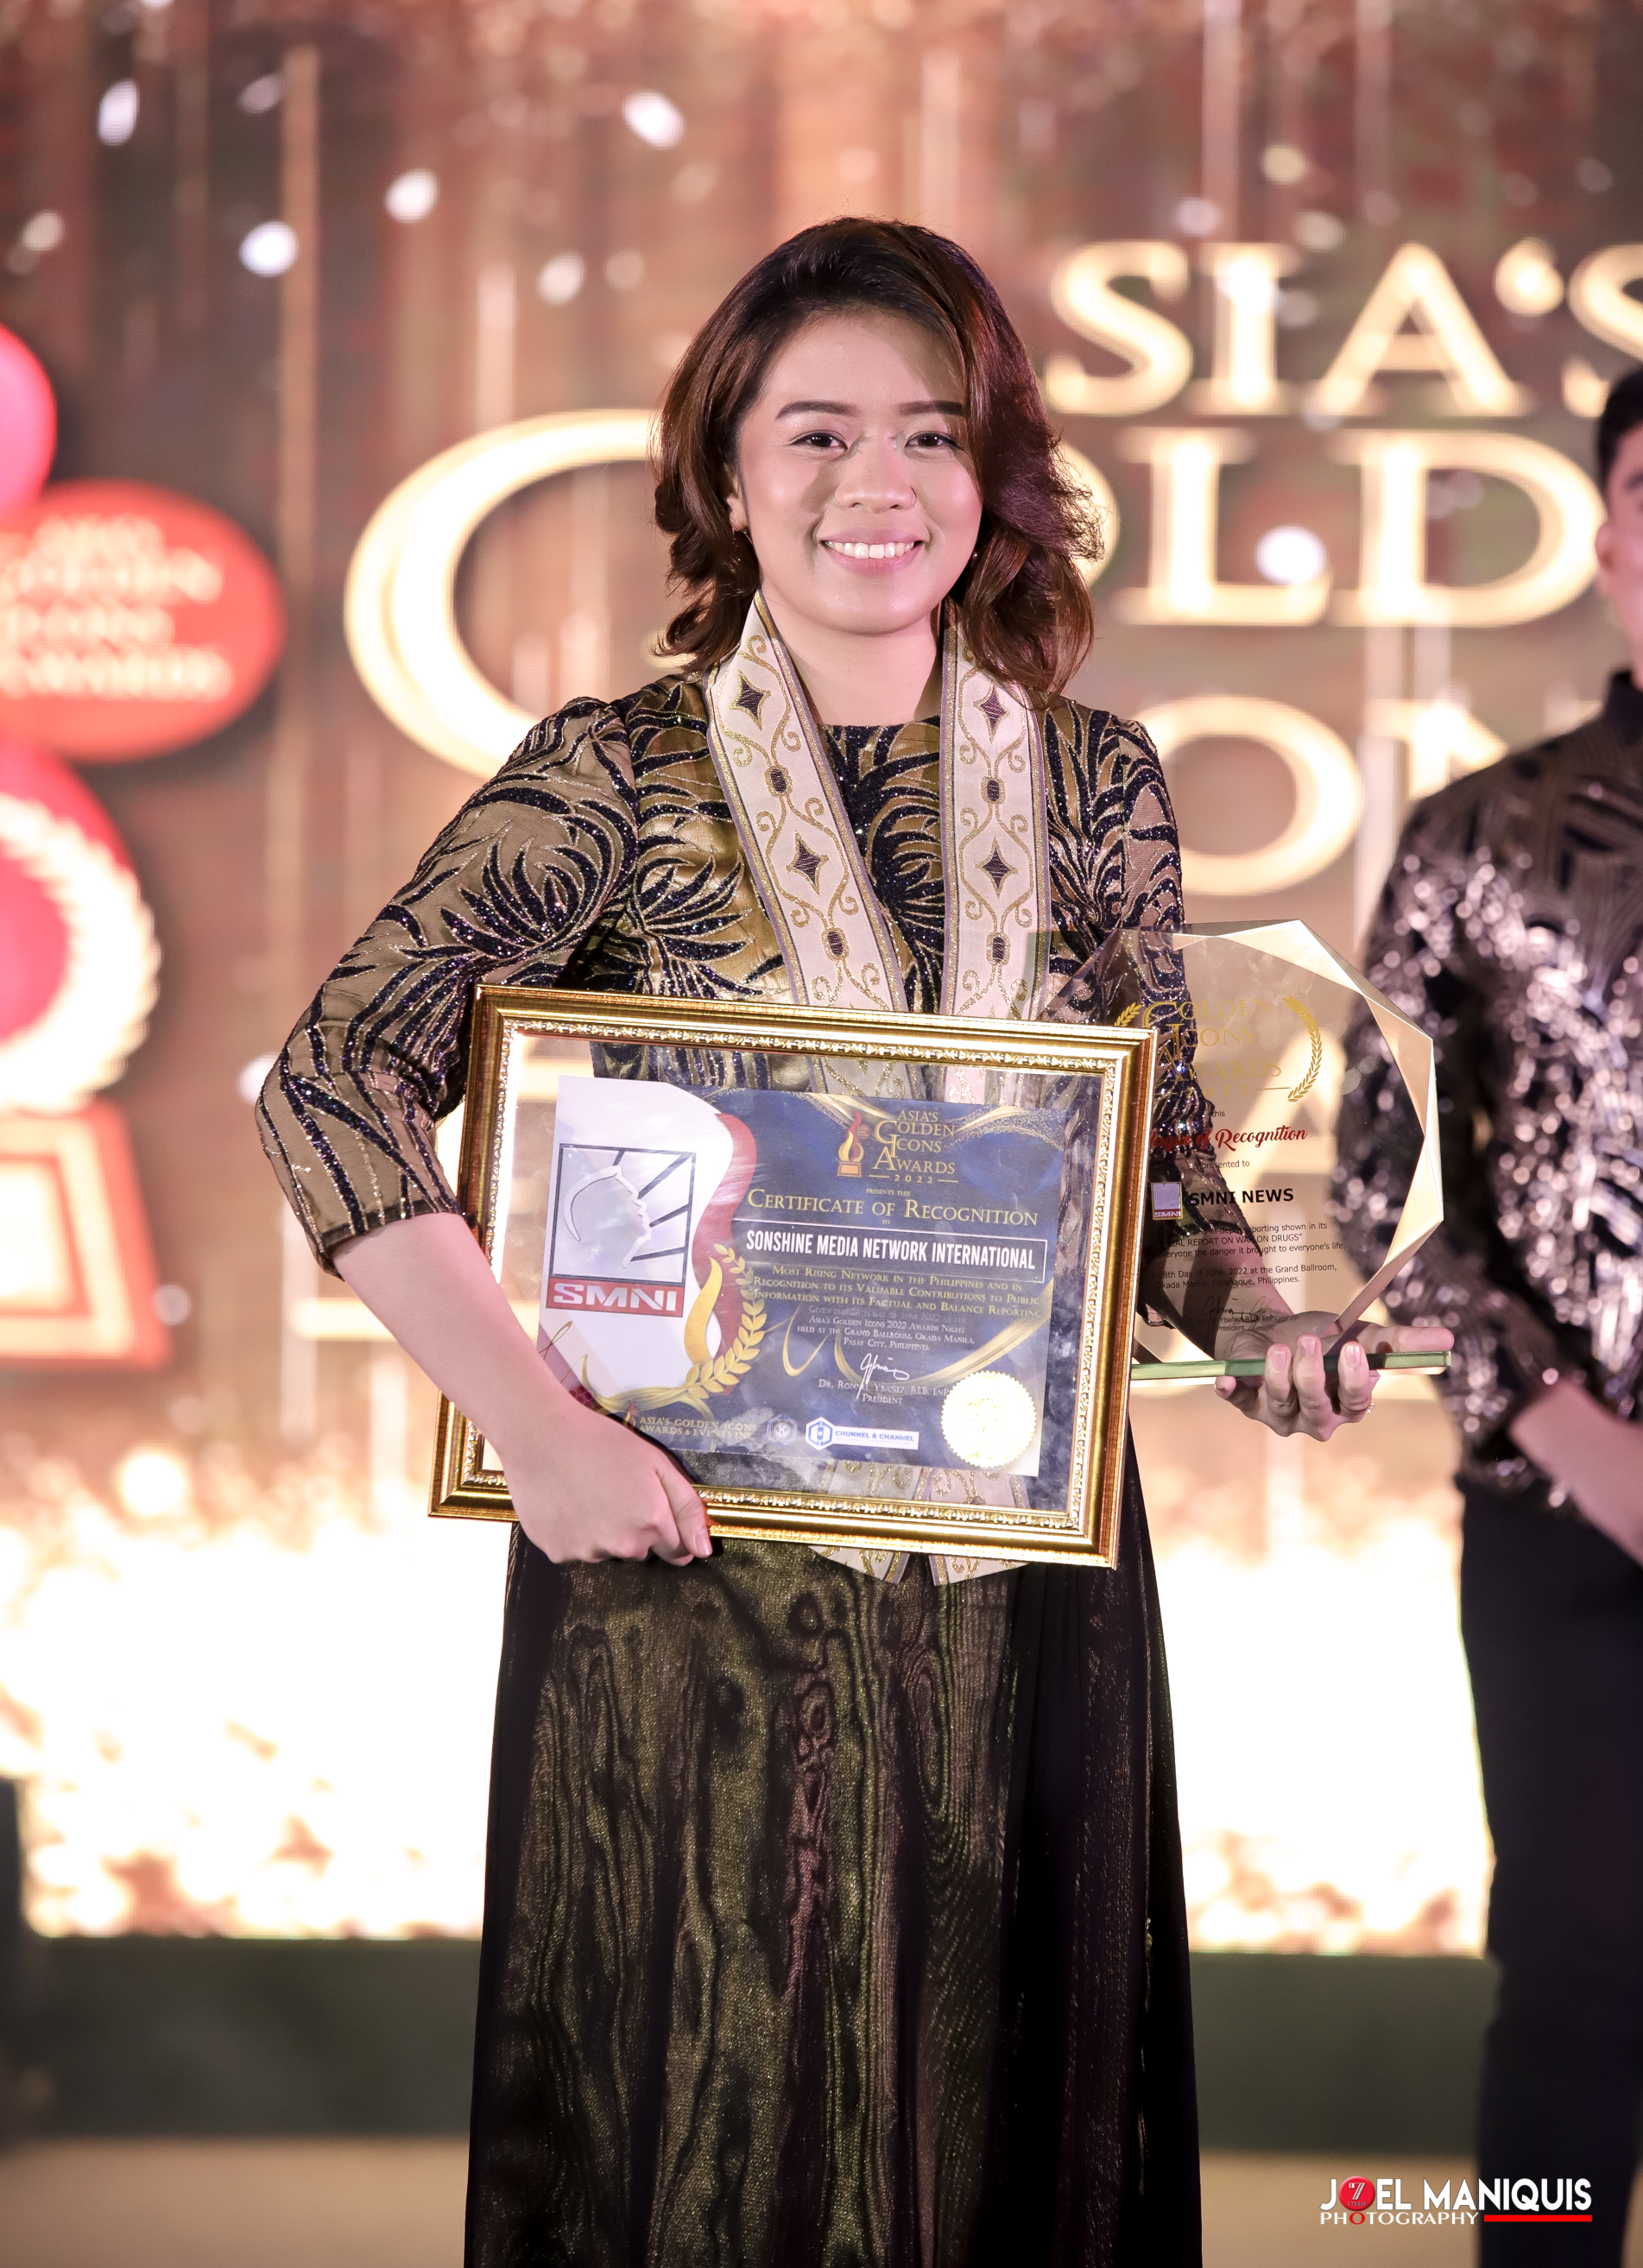 Asia's Golden Icons Awards 2022